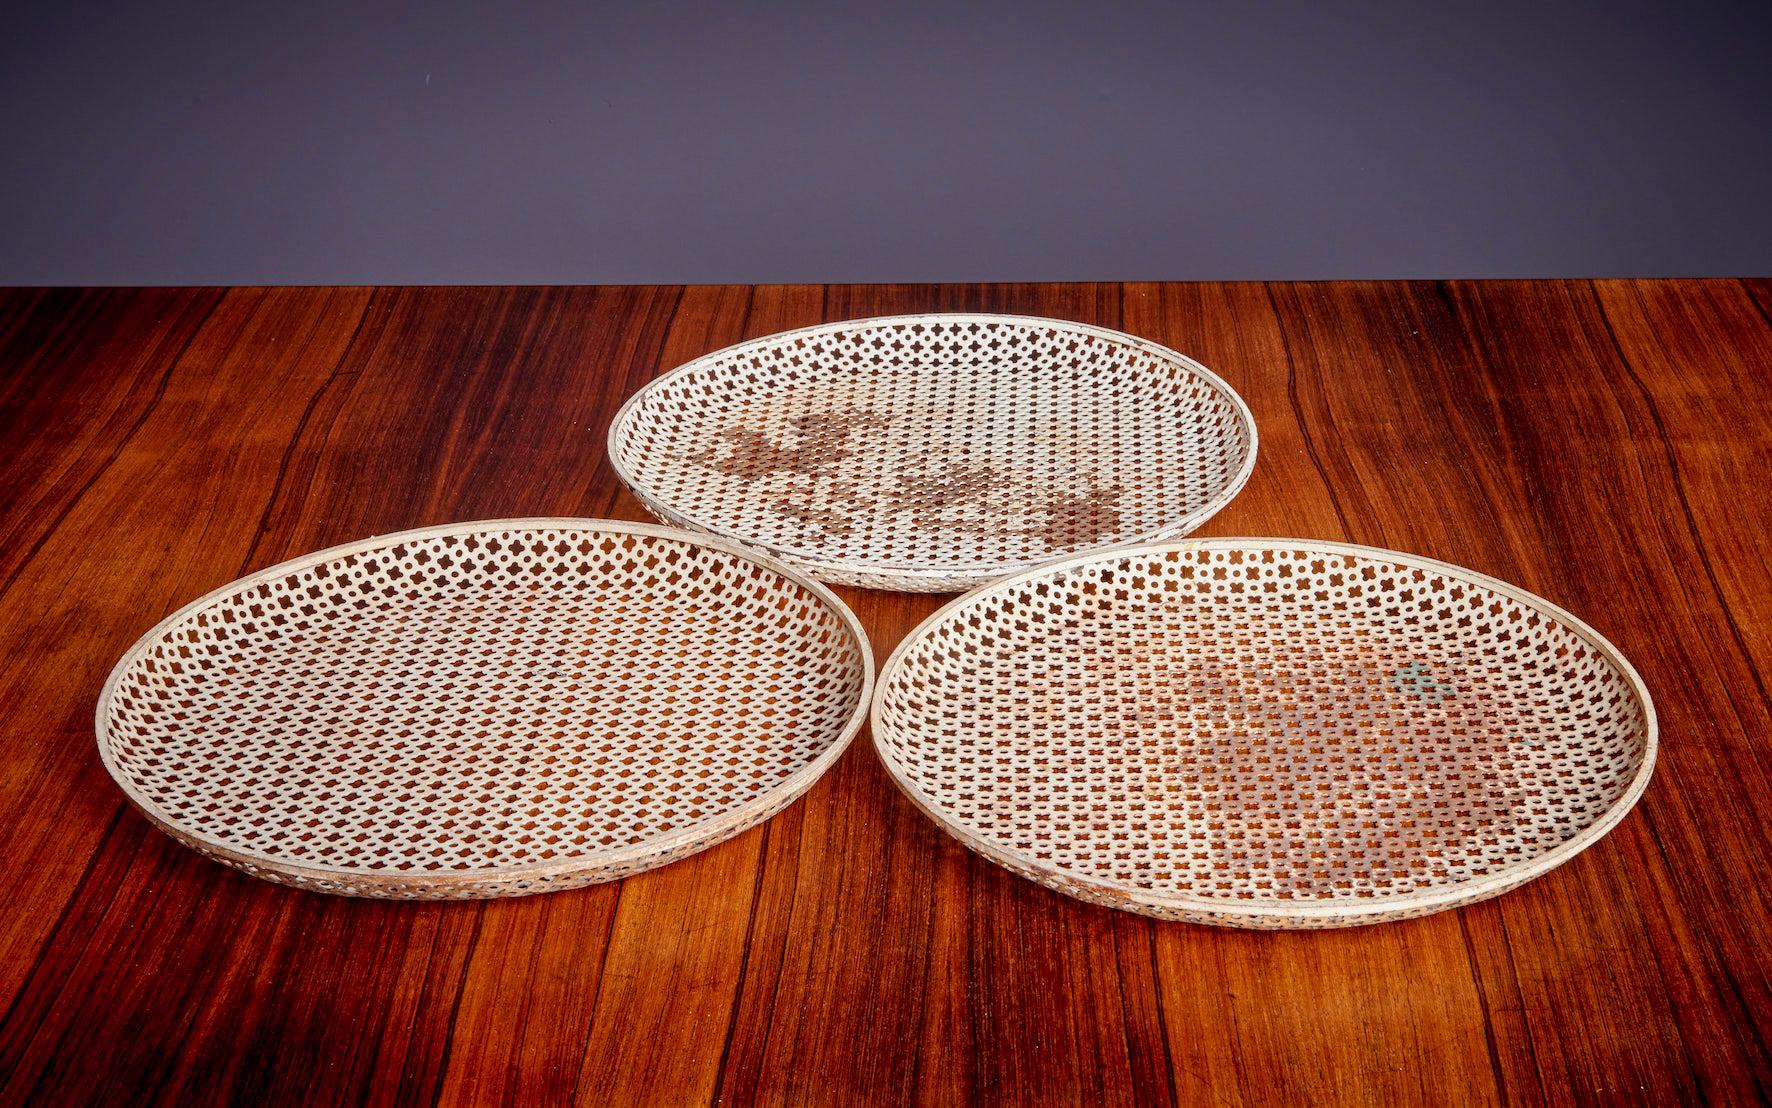 Nice matched Matégot vintage set in vintage condition.

Mathieu Matégot (1910-2001) was a Hungarian-born French designer and artist. He is known for his innovative use of metal tubing and perforated metal sheets, which he incorporated into his